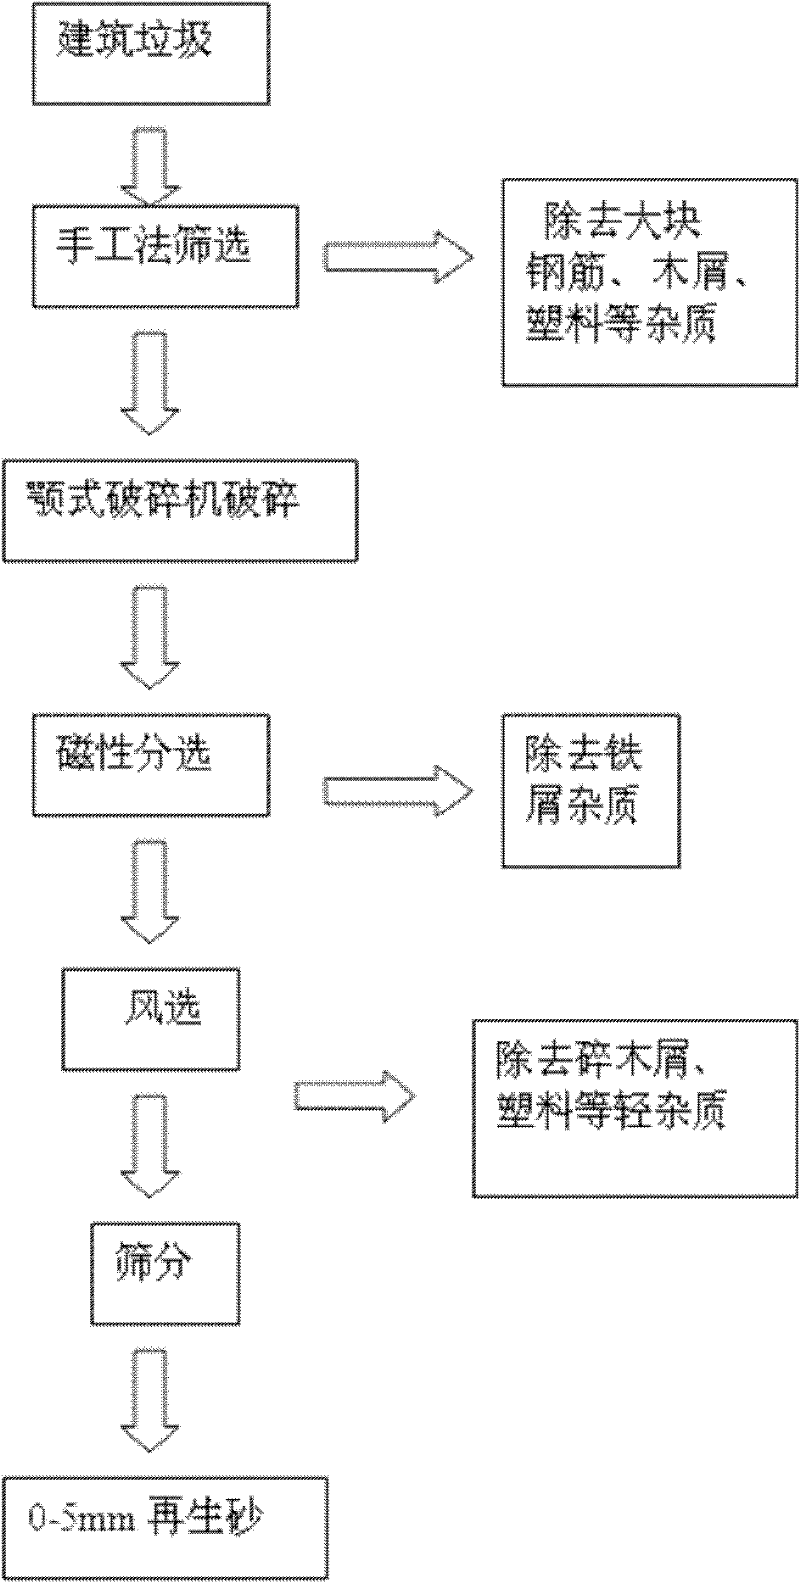 Method for resource recovery of construction wastes